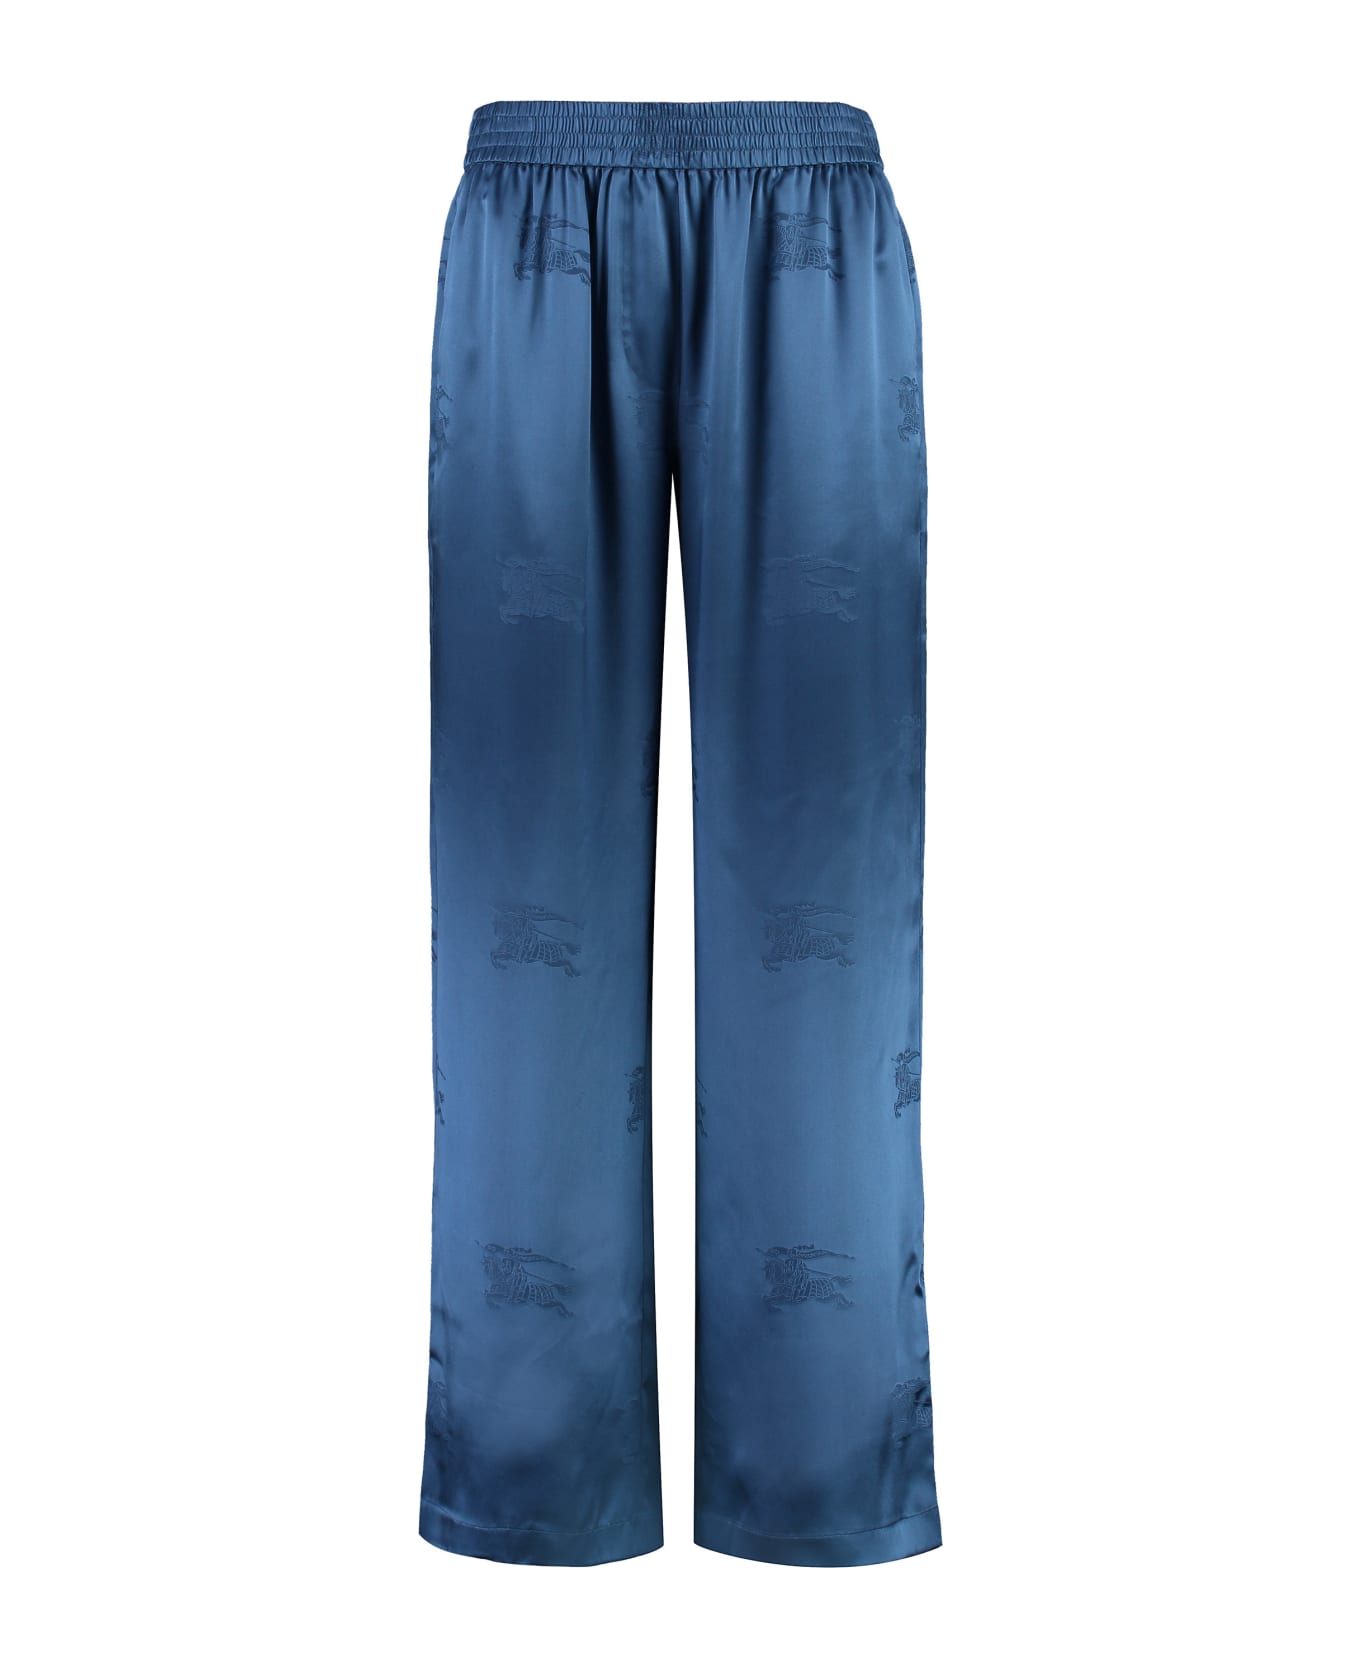 Burberry Silk Trousers - blue ボトムス